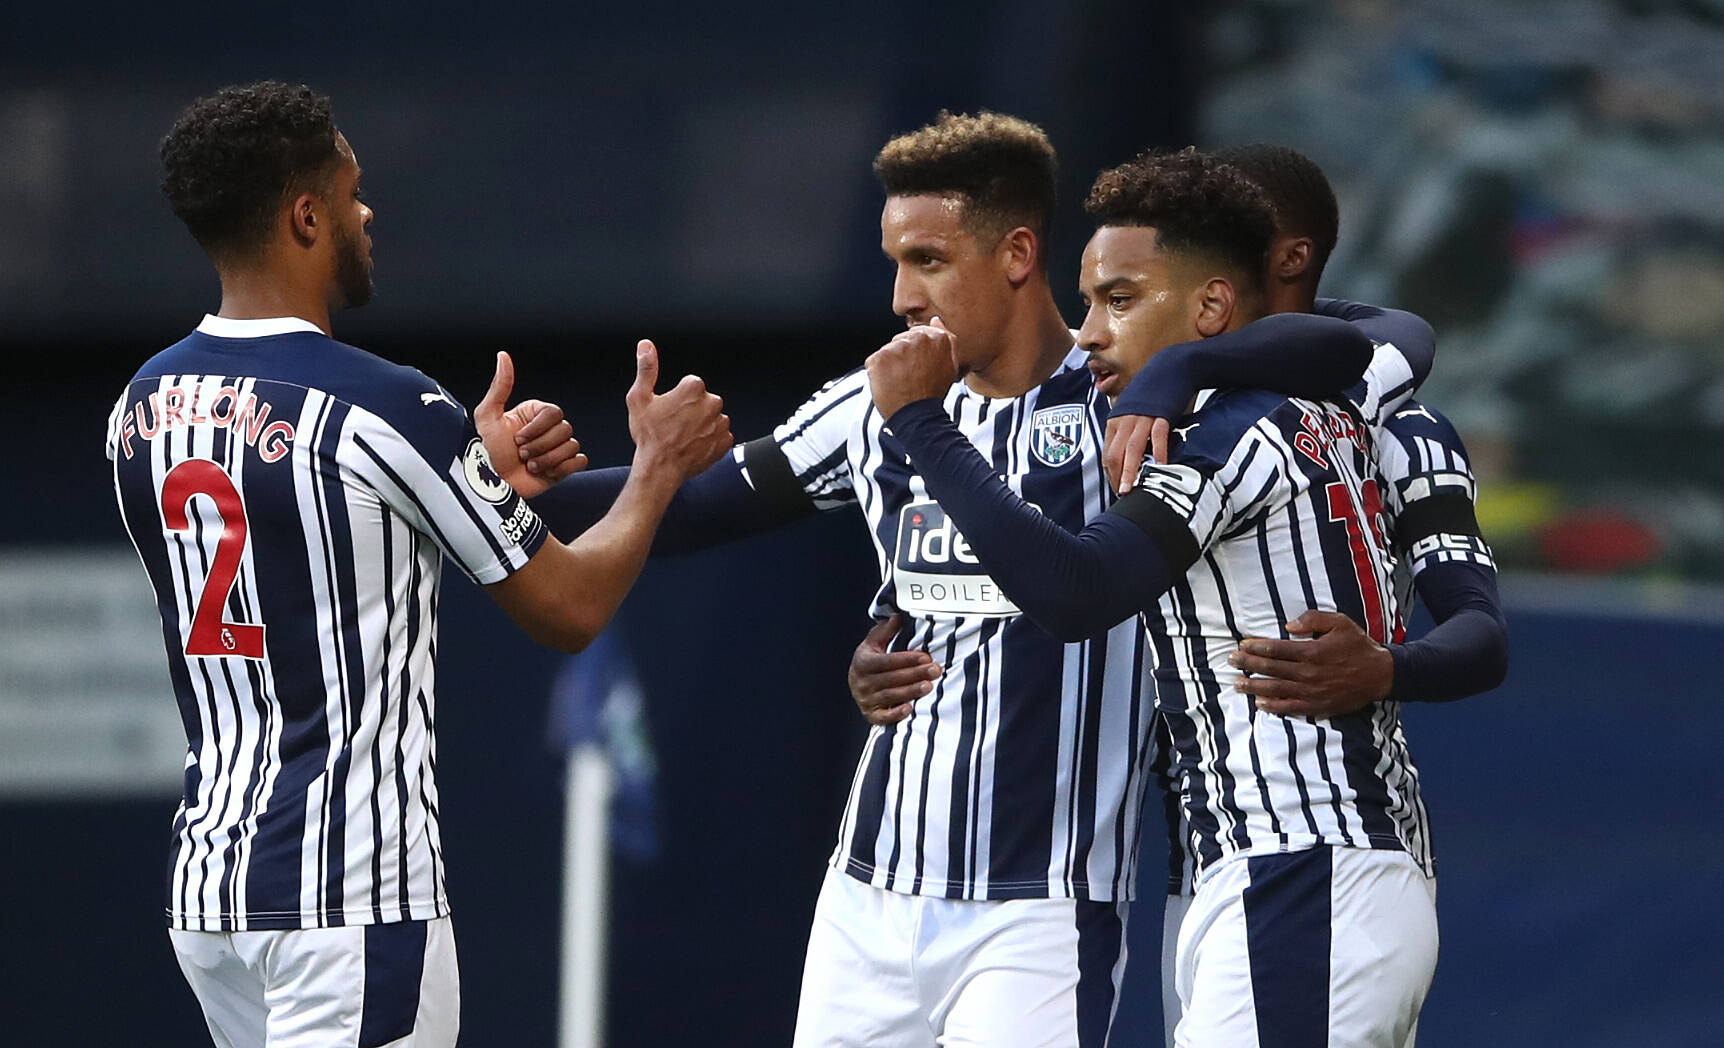 West Bromwich Albion are making a push for survival. (imago Images)